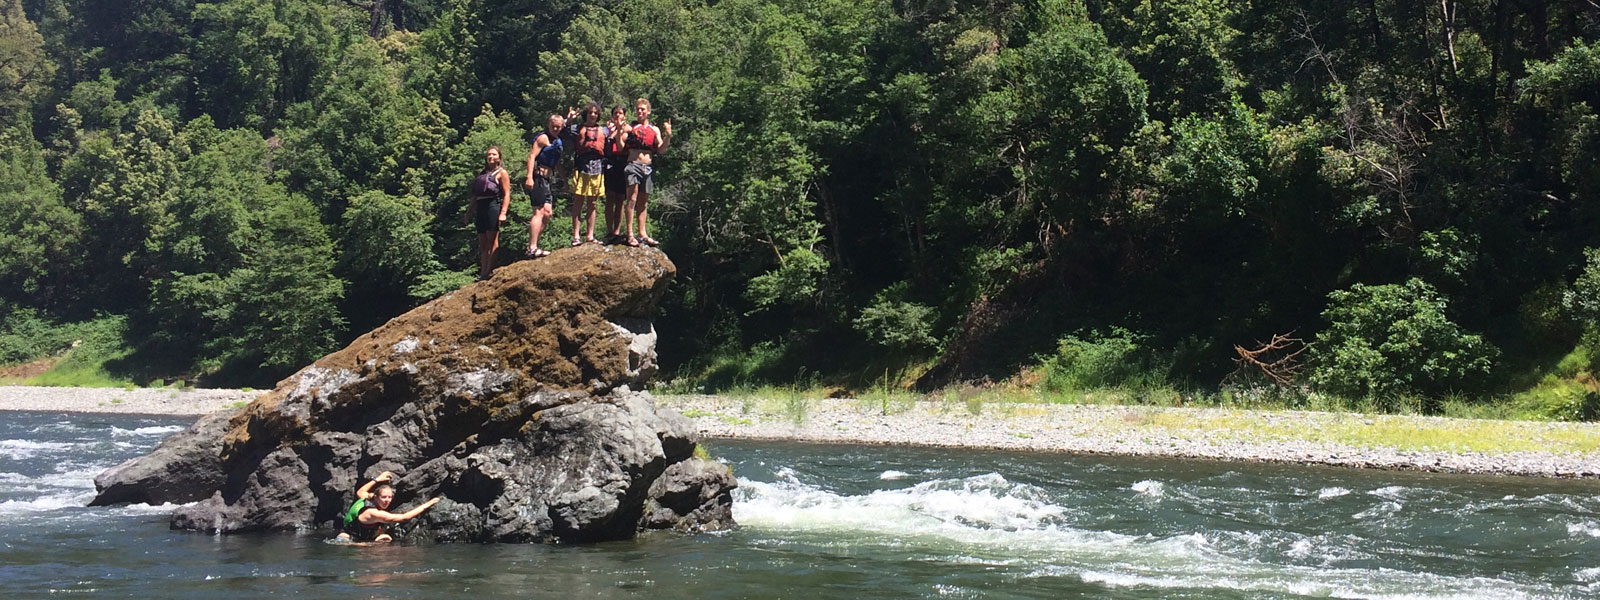 Kids on a rock in the Rogue River in Oregon